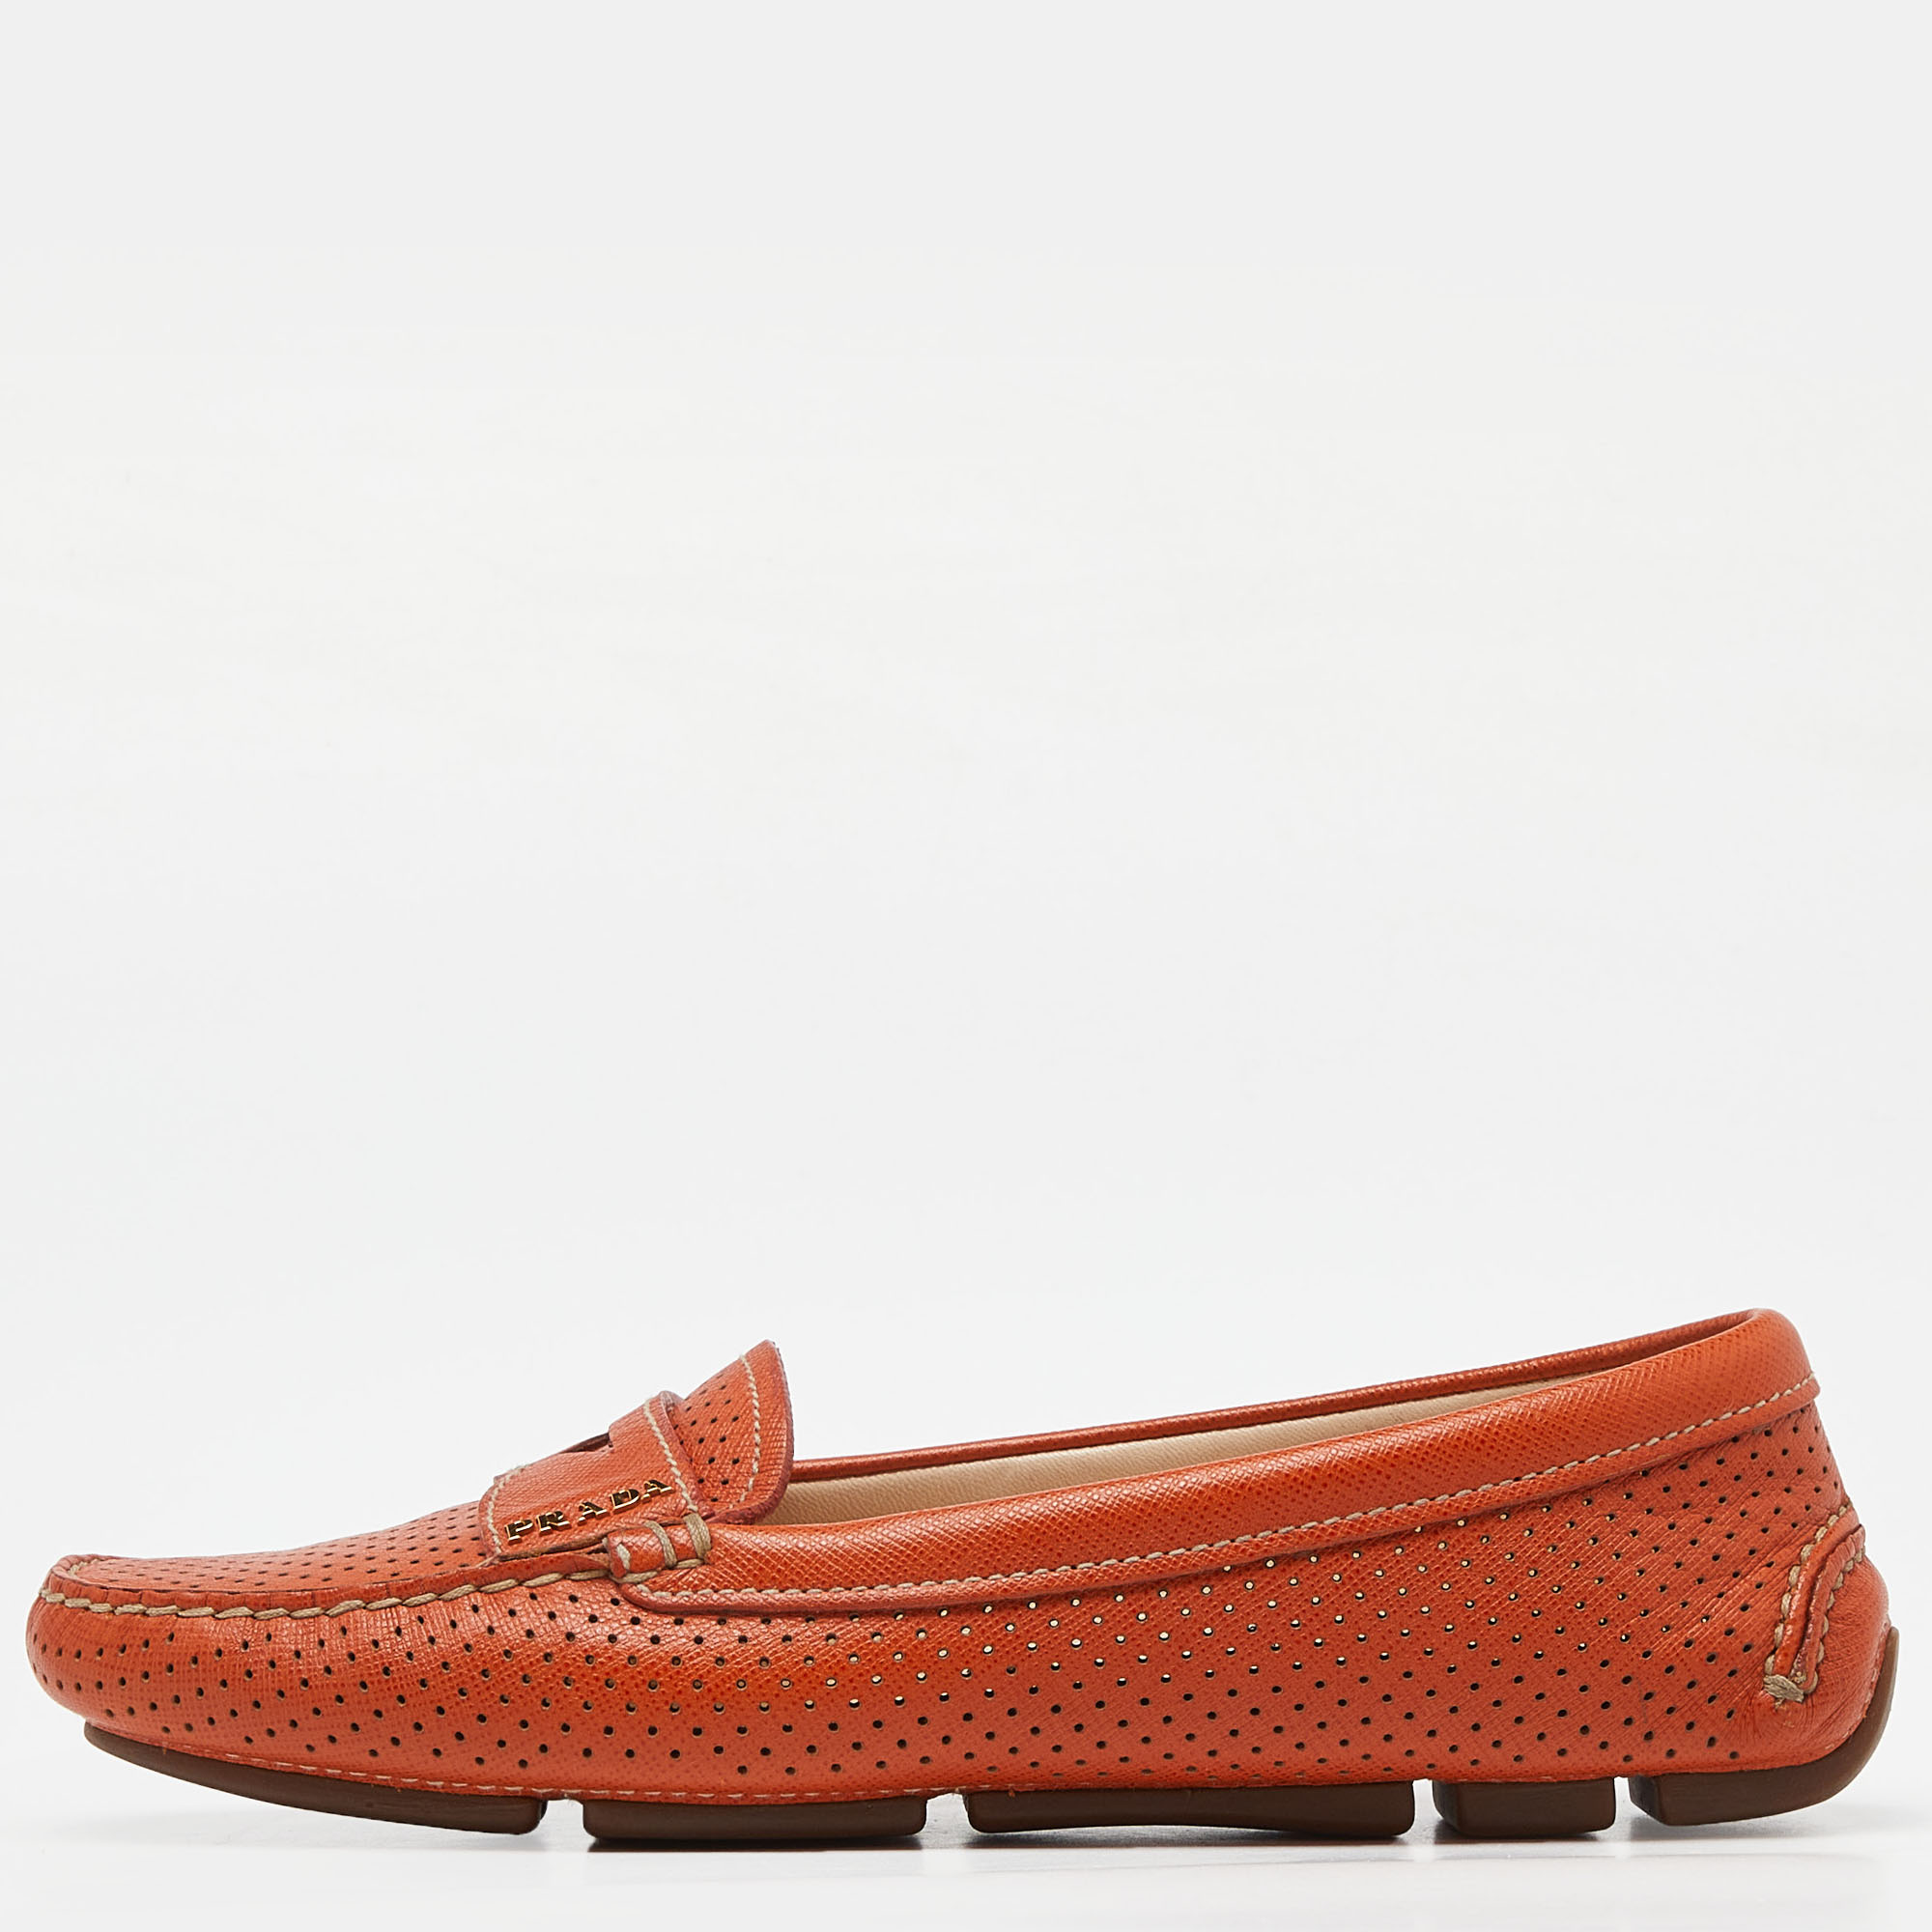 Prada orange perforated leather penny loafers size 36